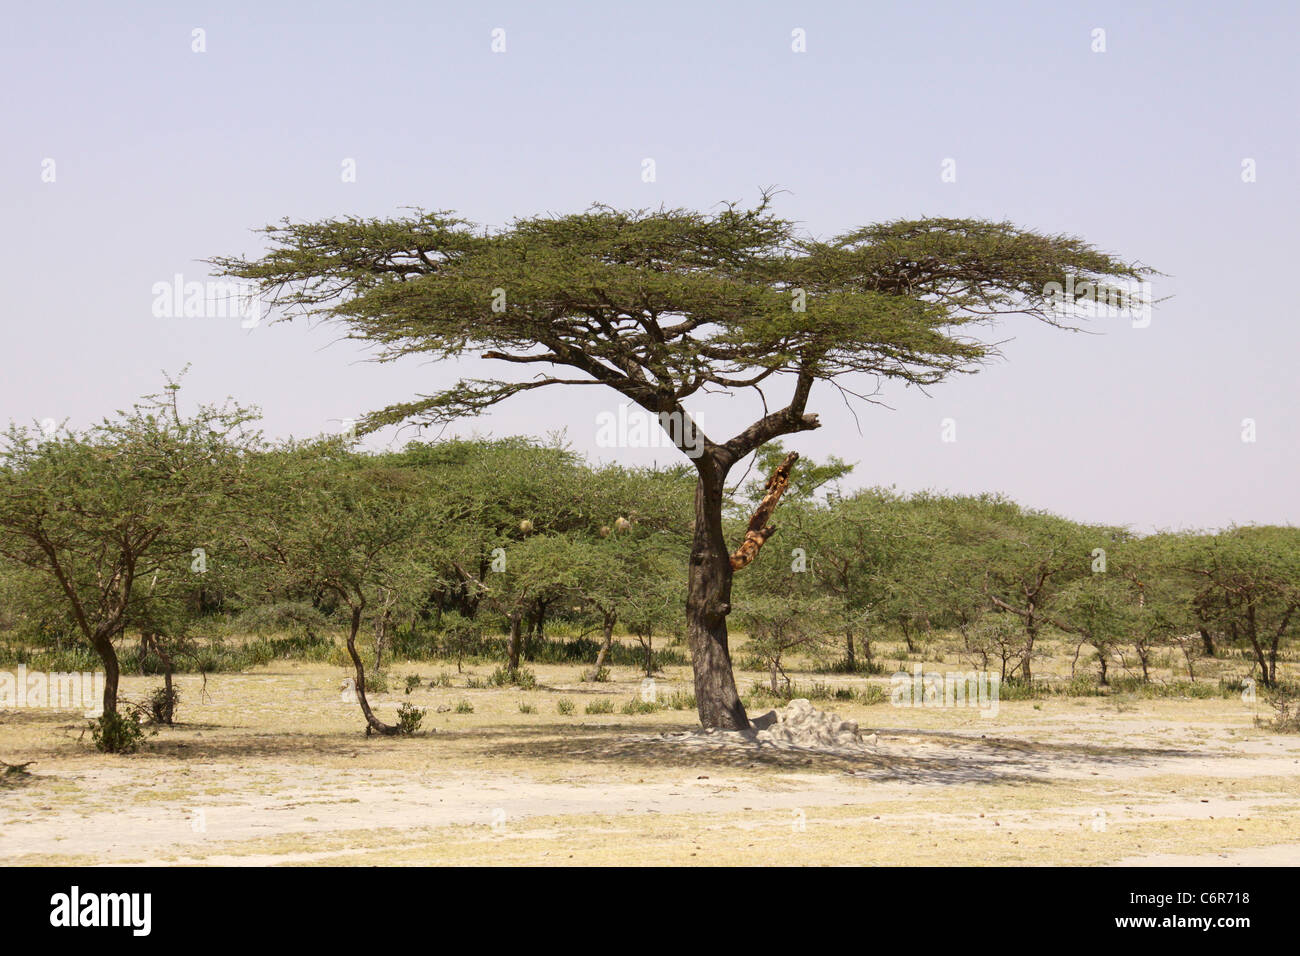 A scenic view of a an Acacia woodland in an Ethiopian countryside Stock Photo